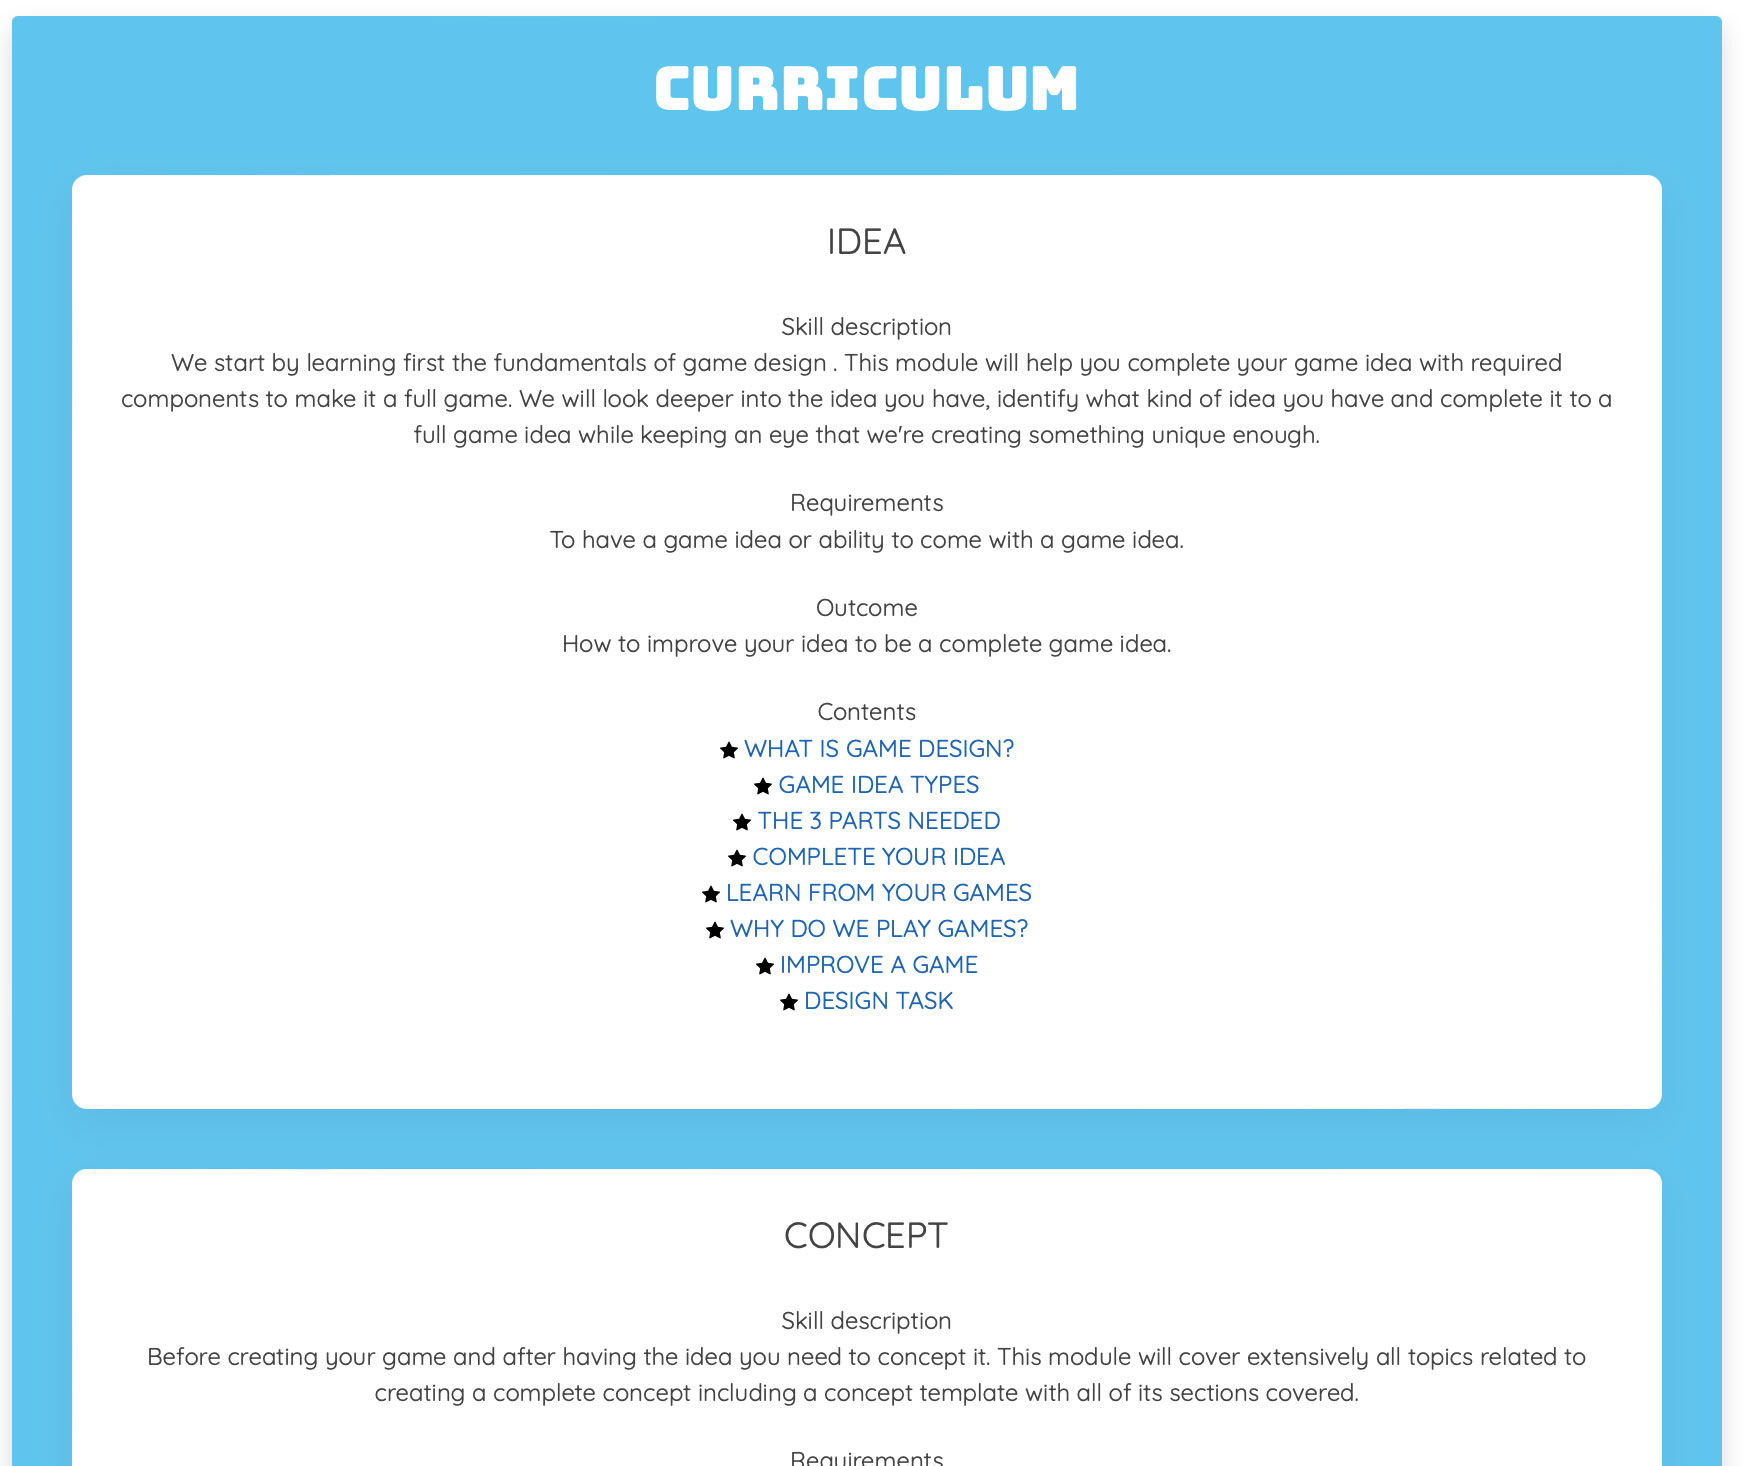 Curriculum outlining contents, requirements and outcome